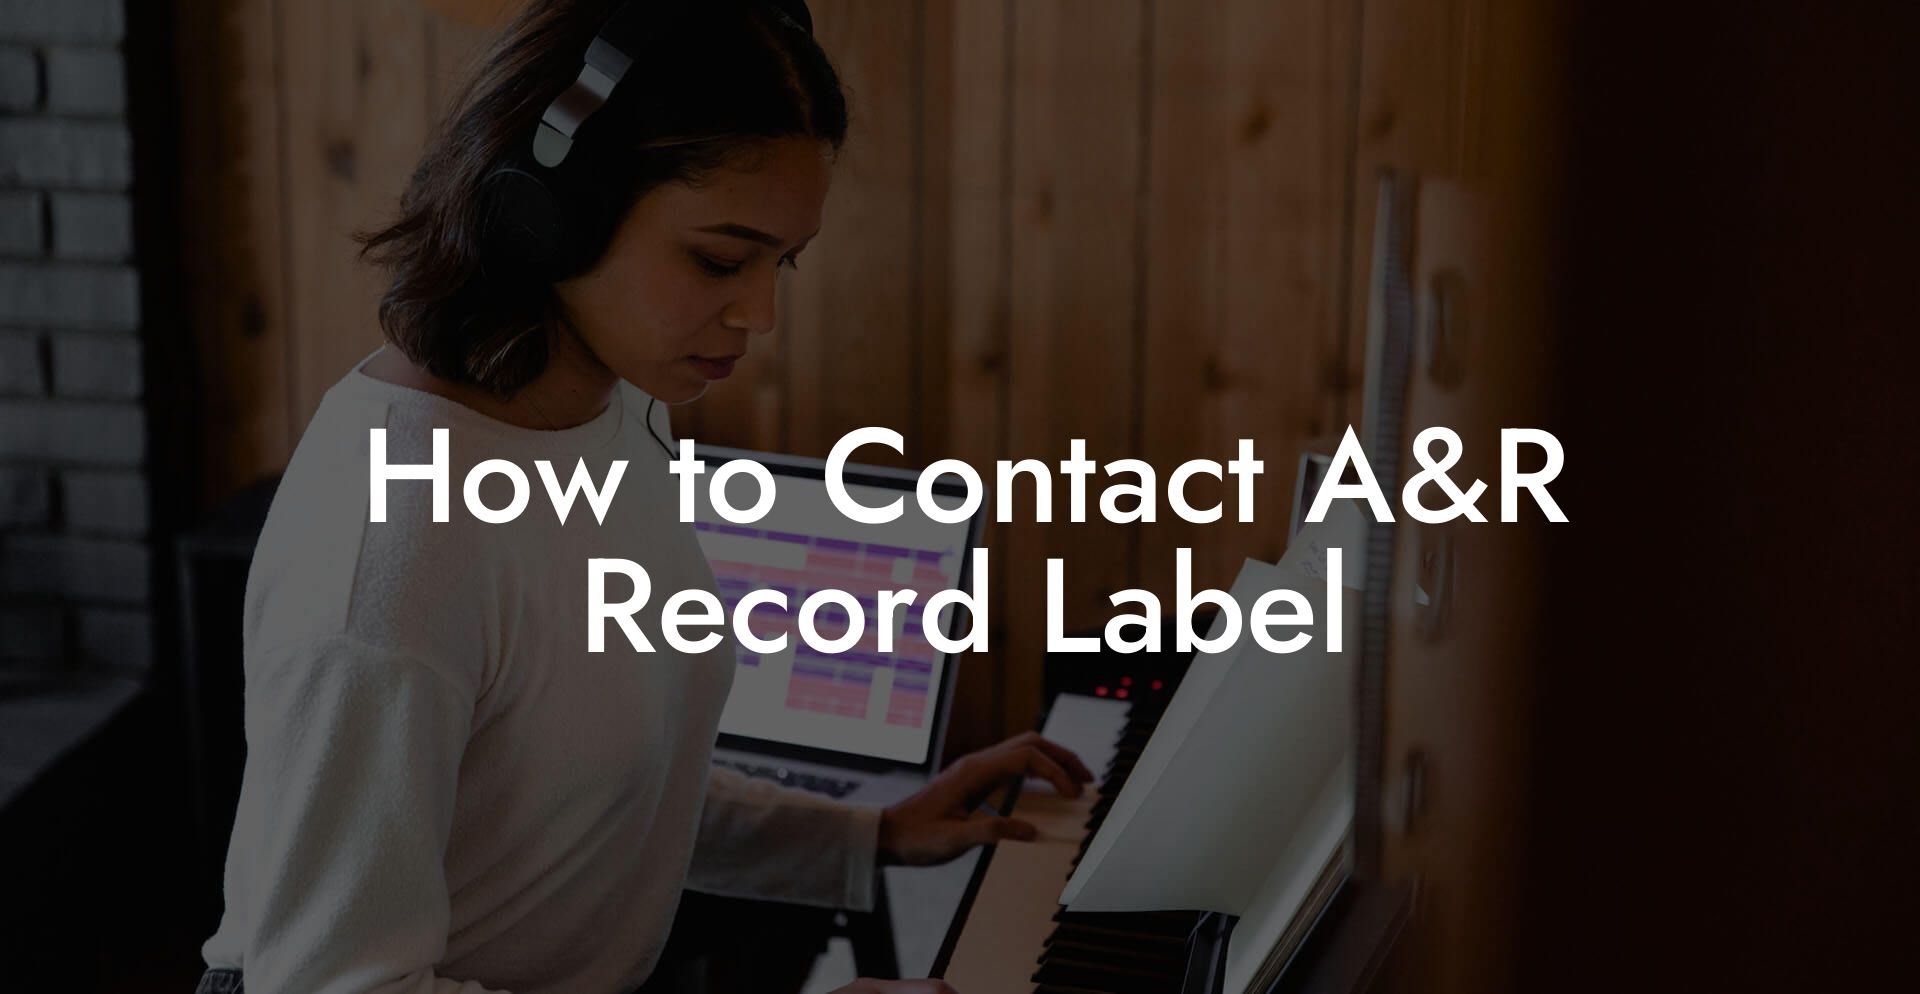 How to Contact A&R Record Label